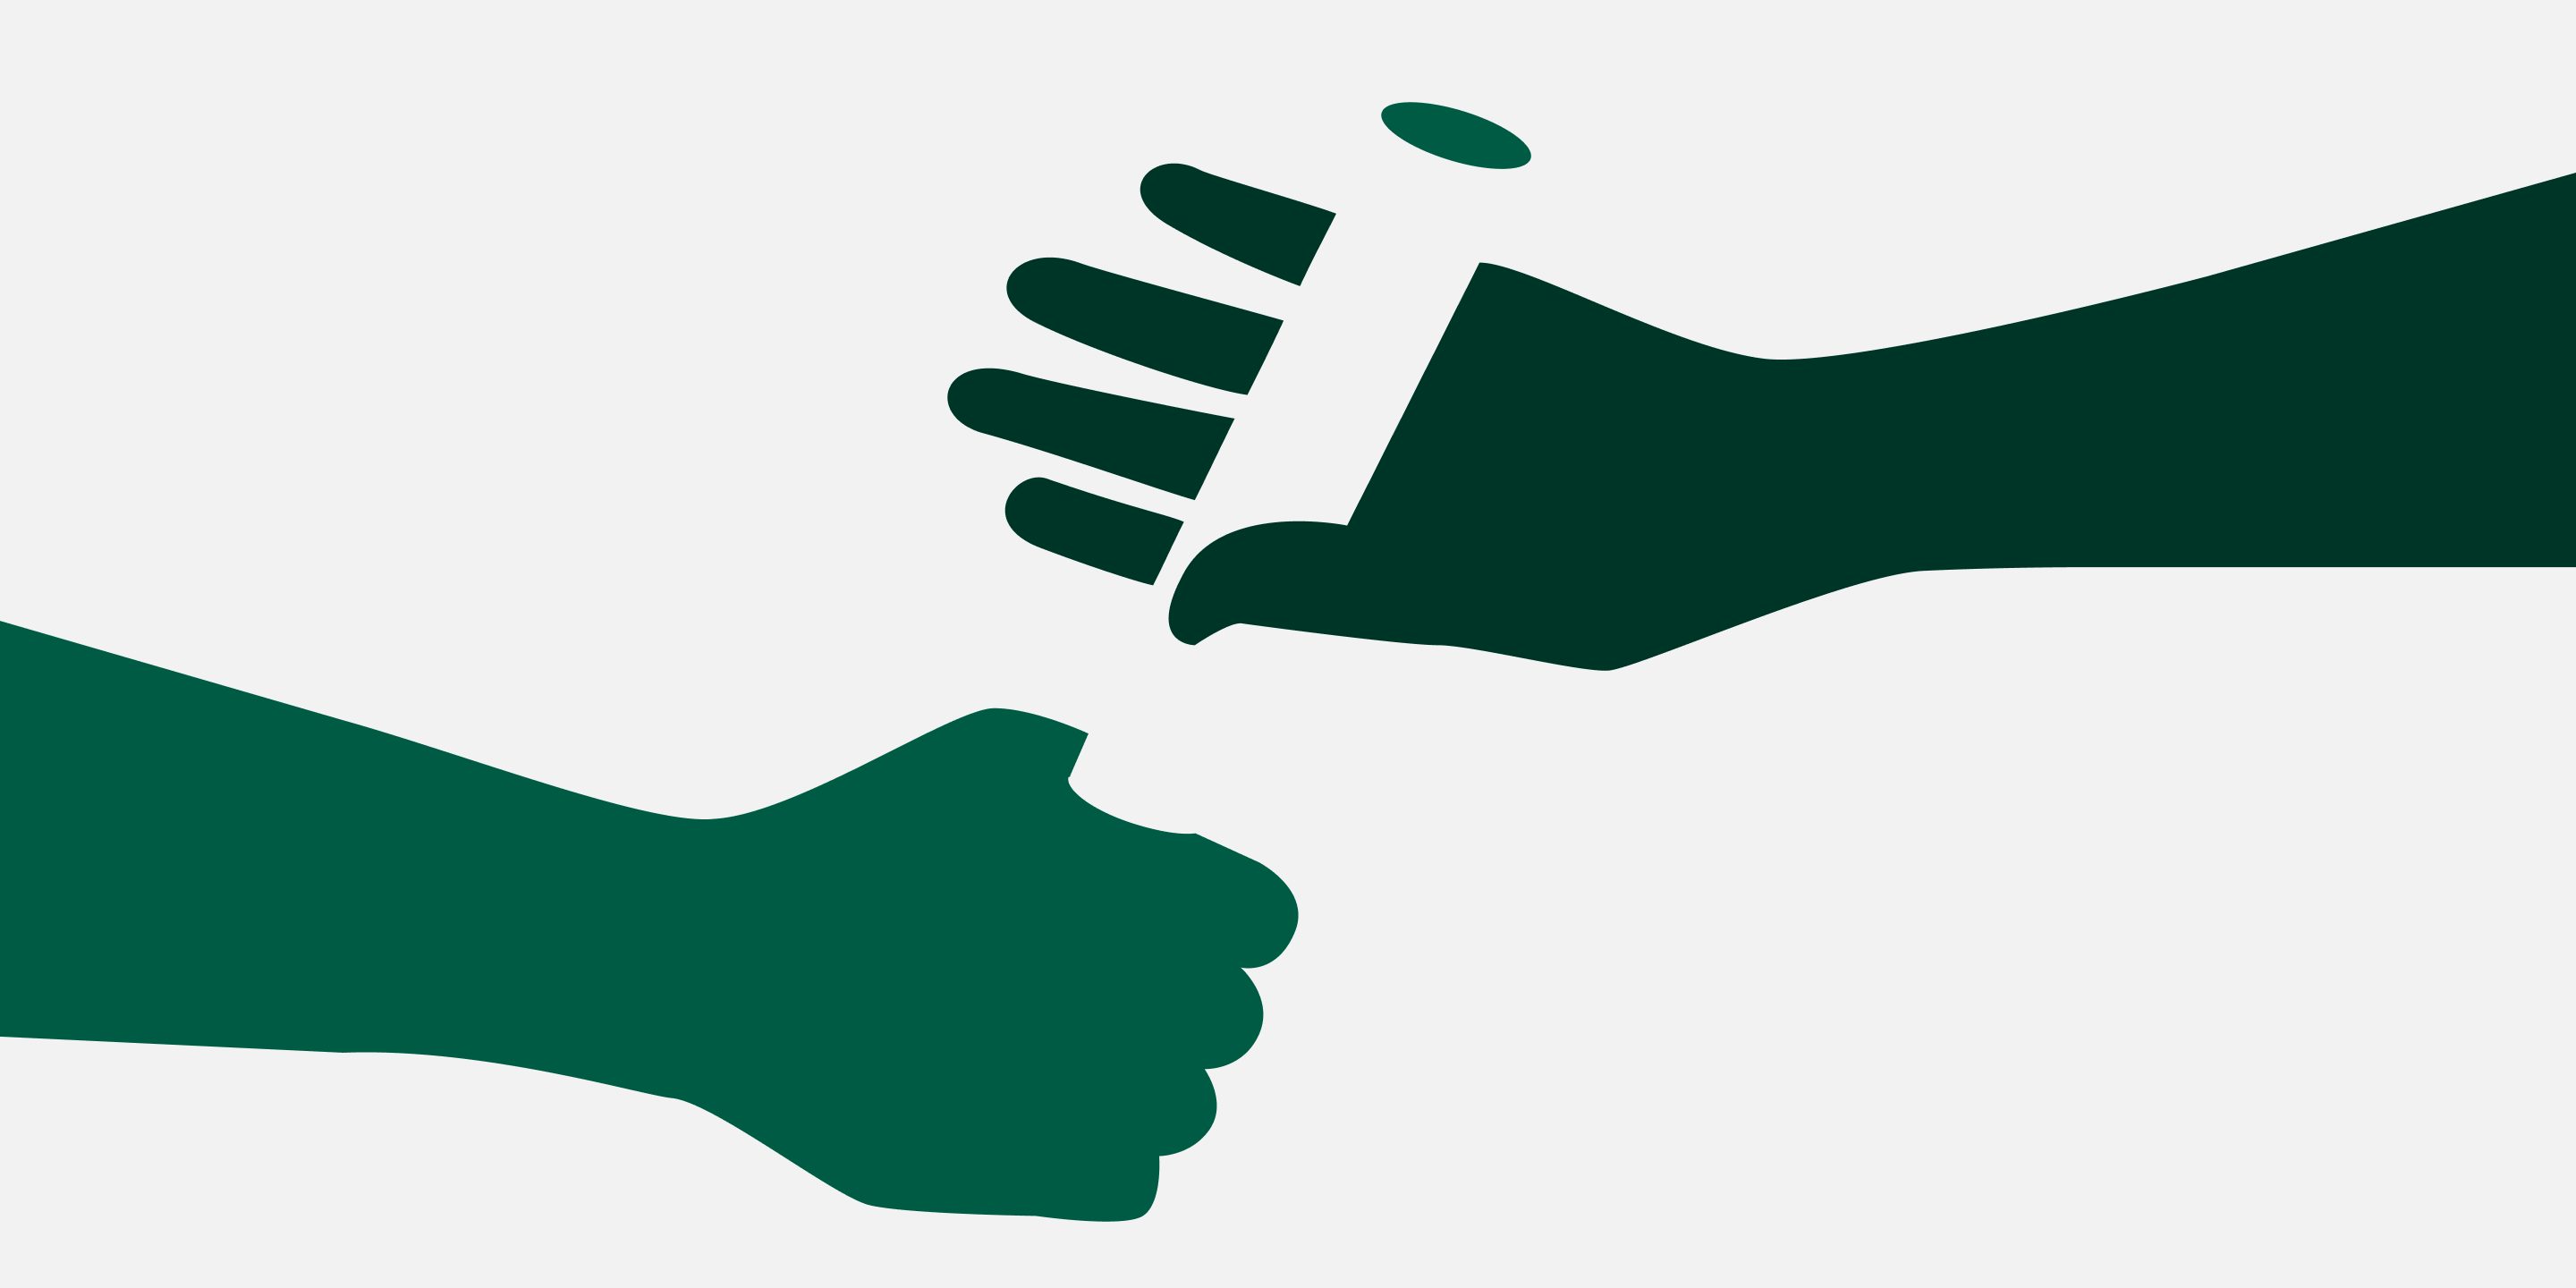 Simple graphic showing two solid dark green hands passing a baton over a light grey background, symbolizing the Sales Handoff process